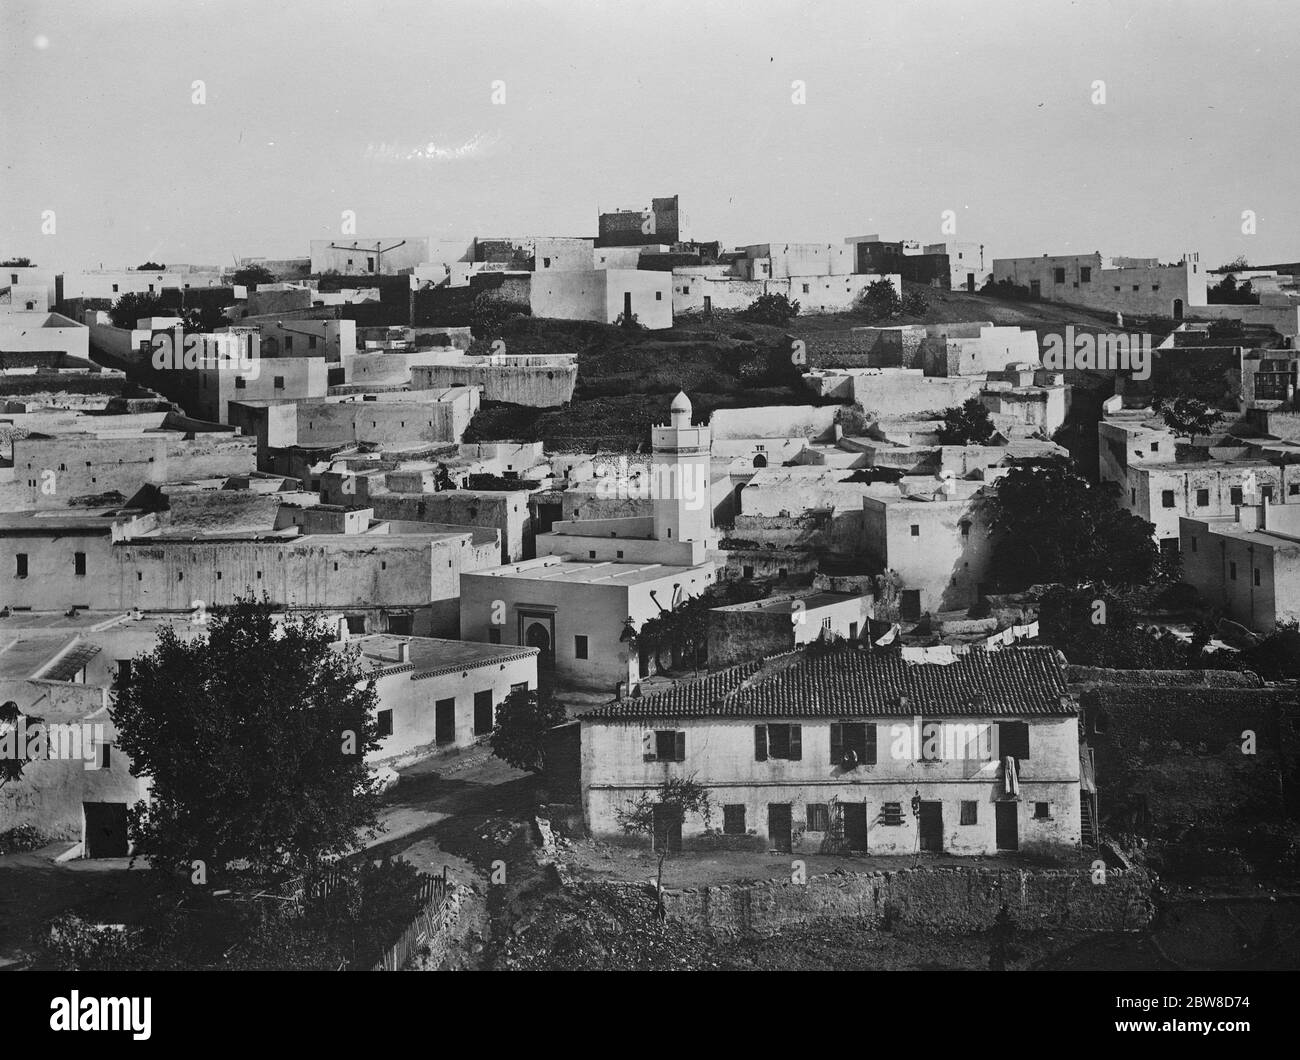 Hundreds dead in great Algerian flood . Principal centres of the disaster Mostaganem and Perregaux . Mostaganem a general view of the Arab town of Tijdit or Tigditt . . 28 November 1927 Stock Photo